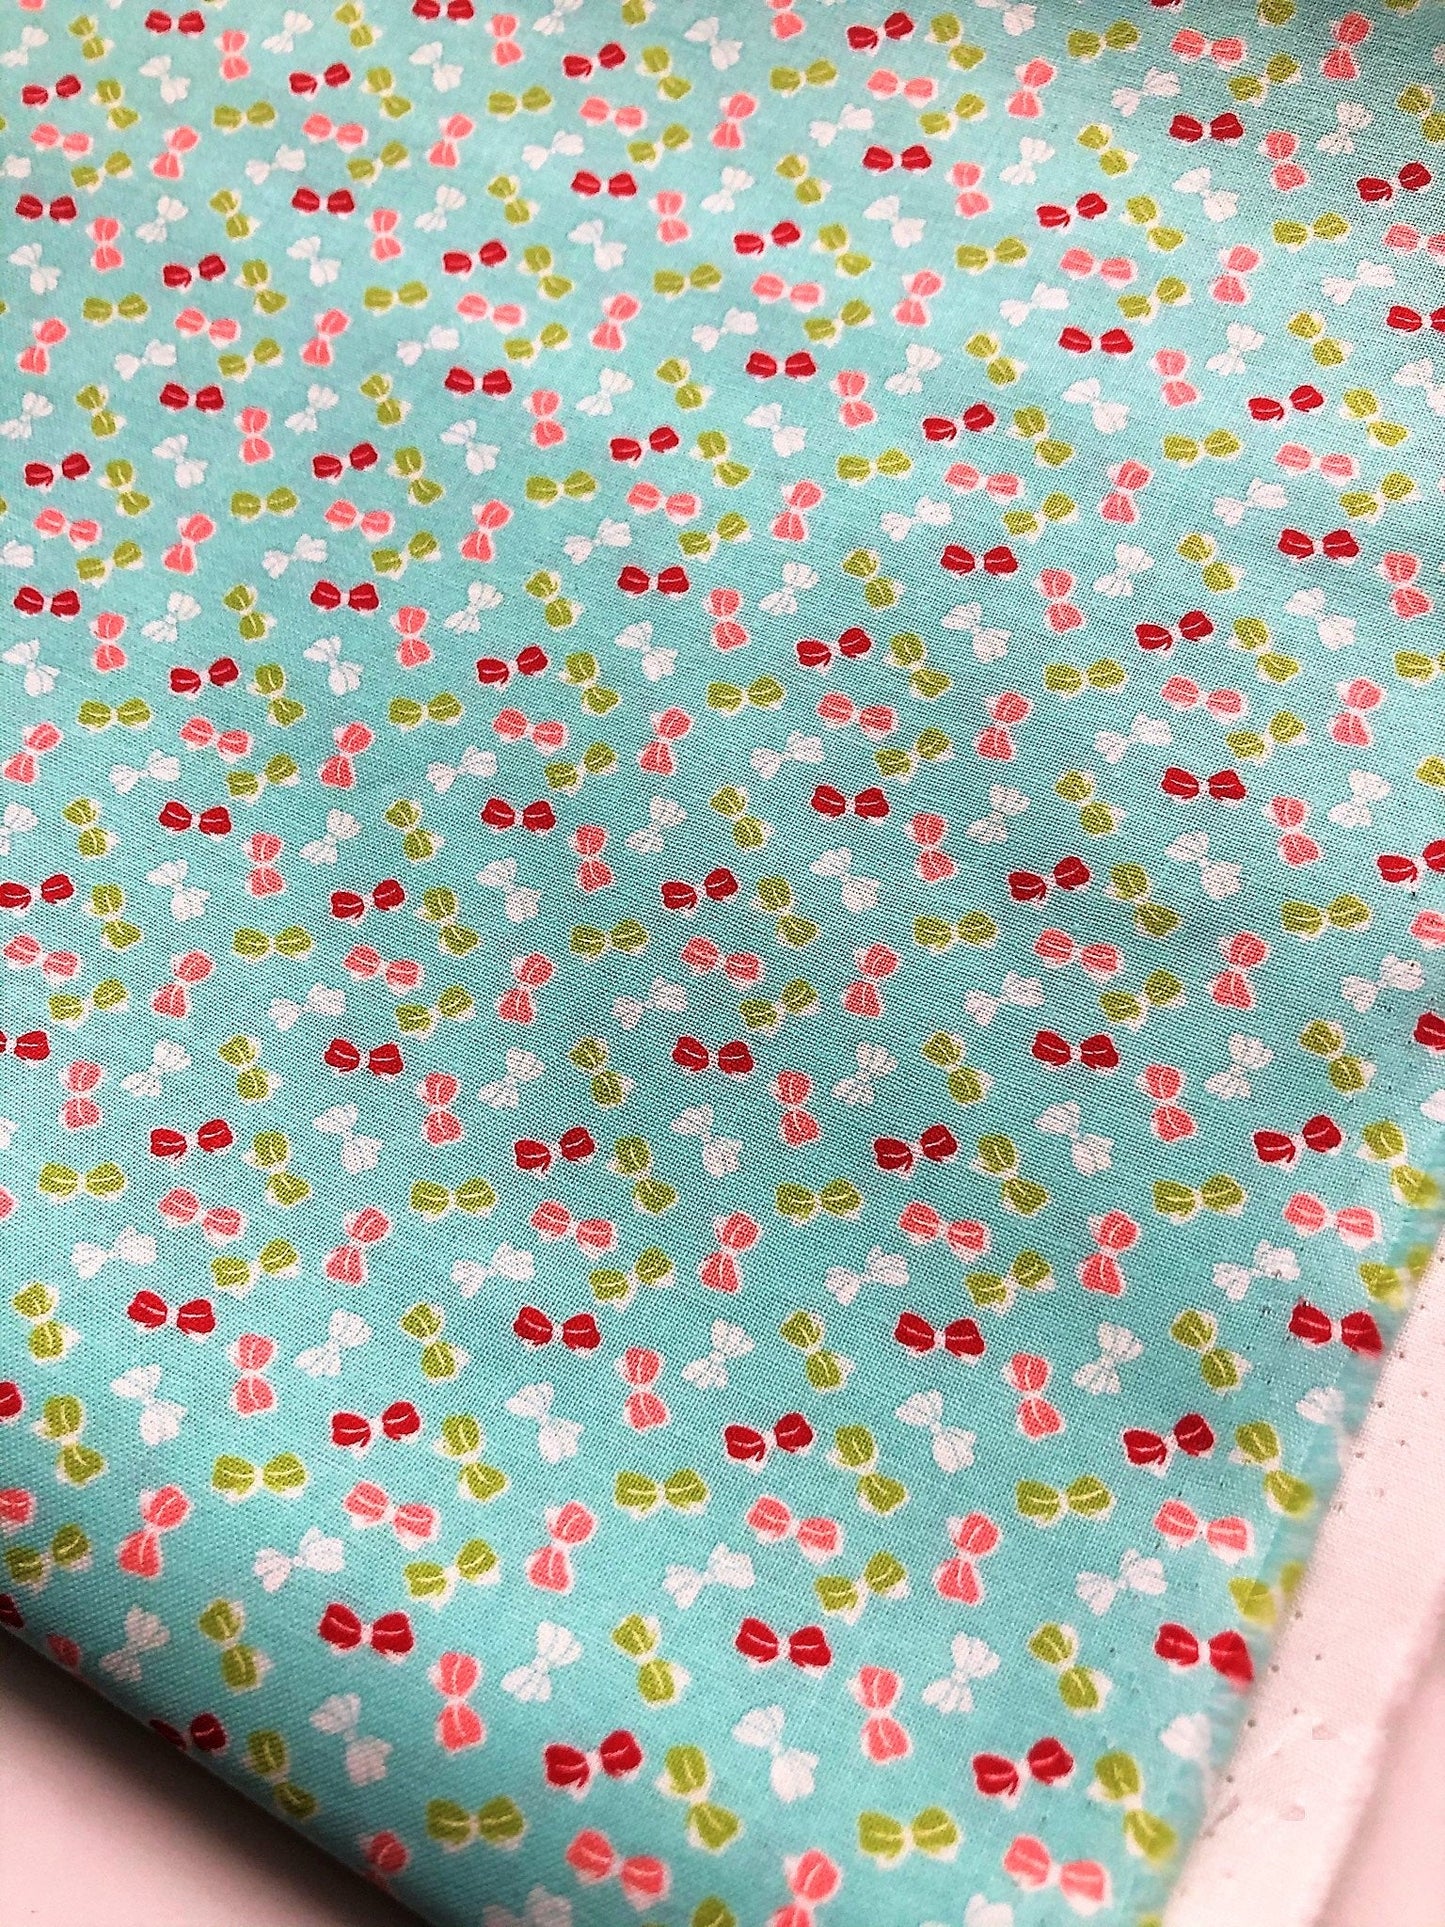 One Metre Moda fabric - Little Ruby by Bonnie & Camille